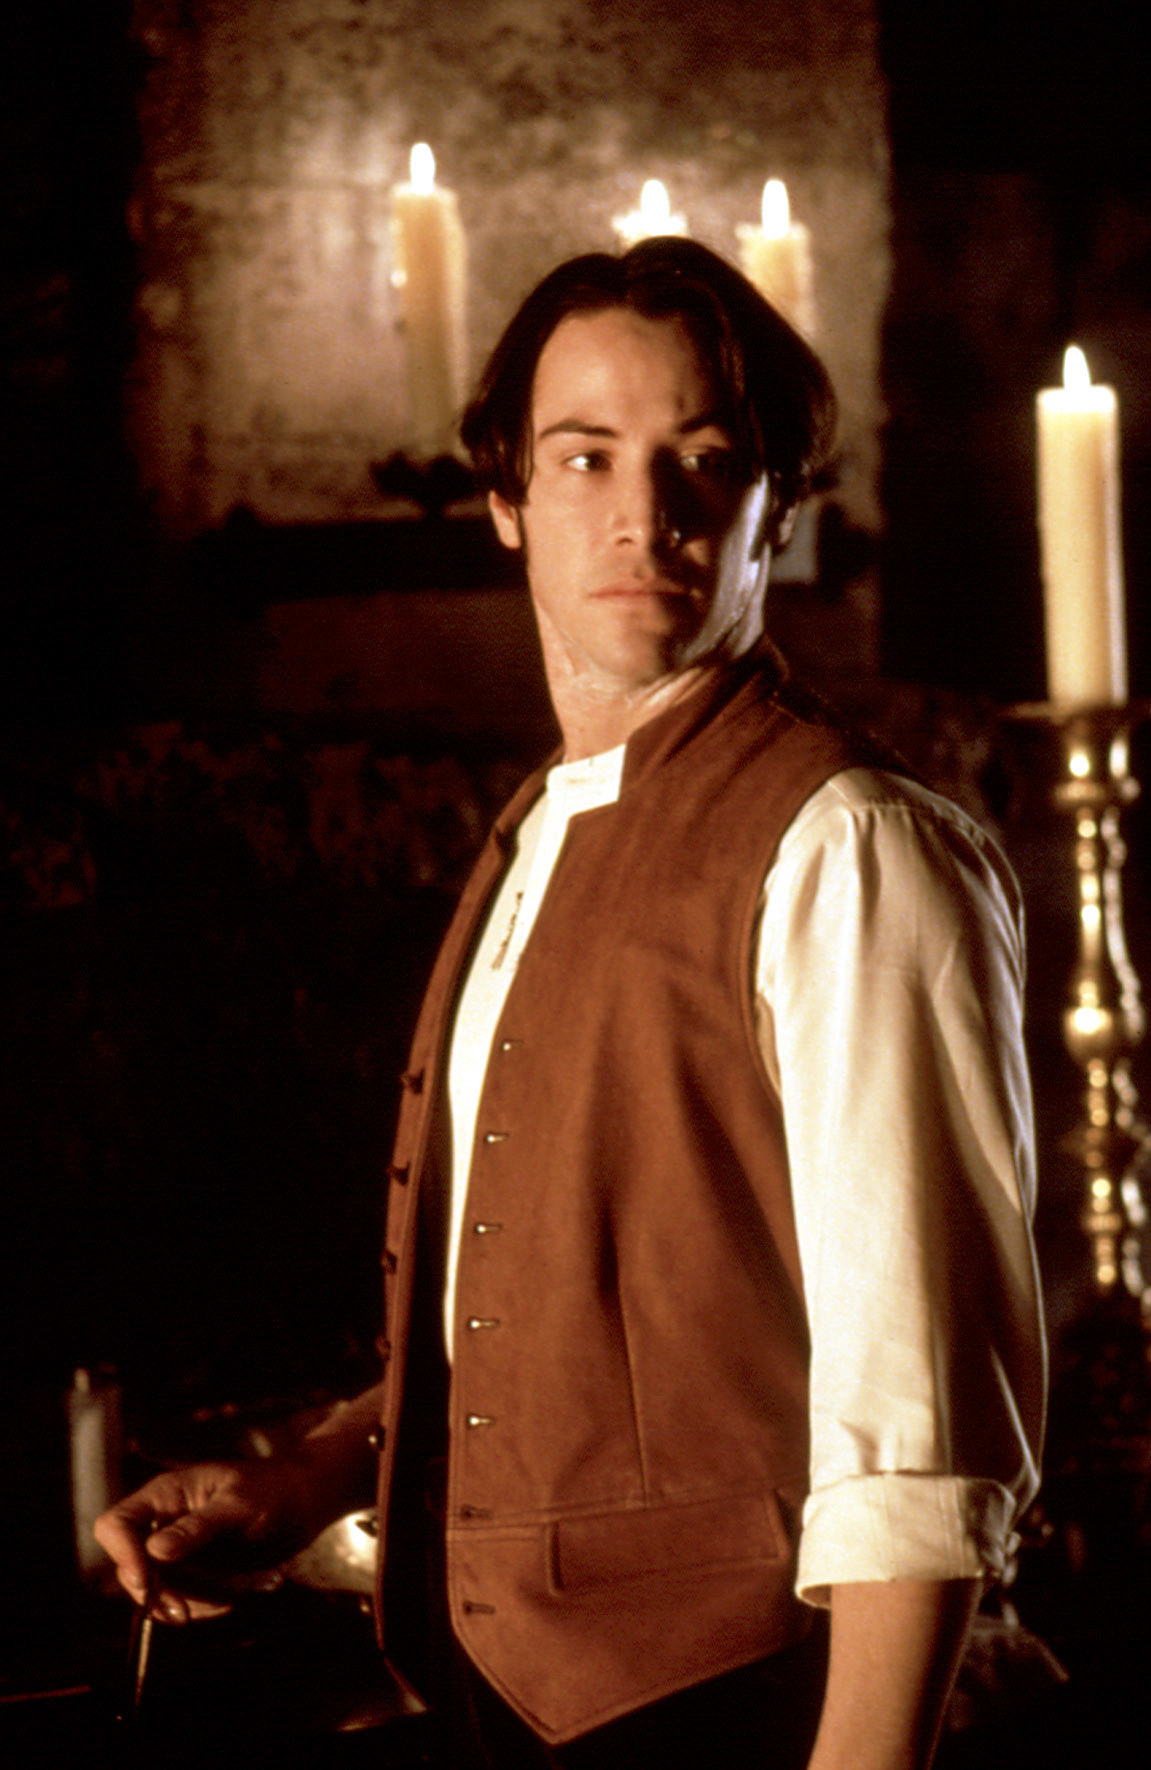 Keanu as Jonathan in a vest and shirt with rolled-up sleeves